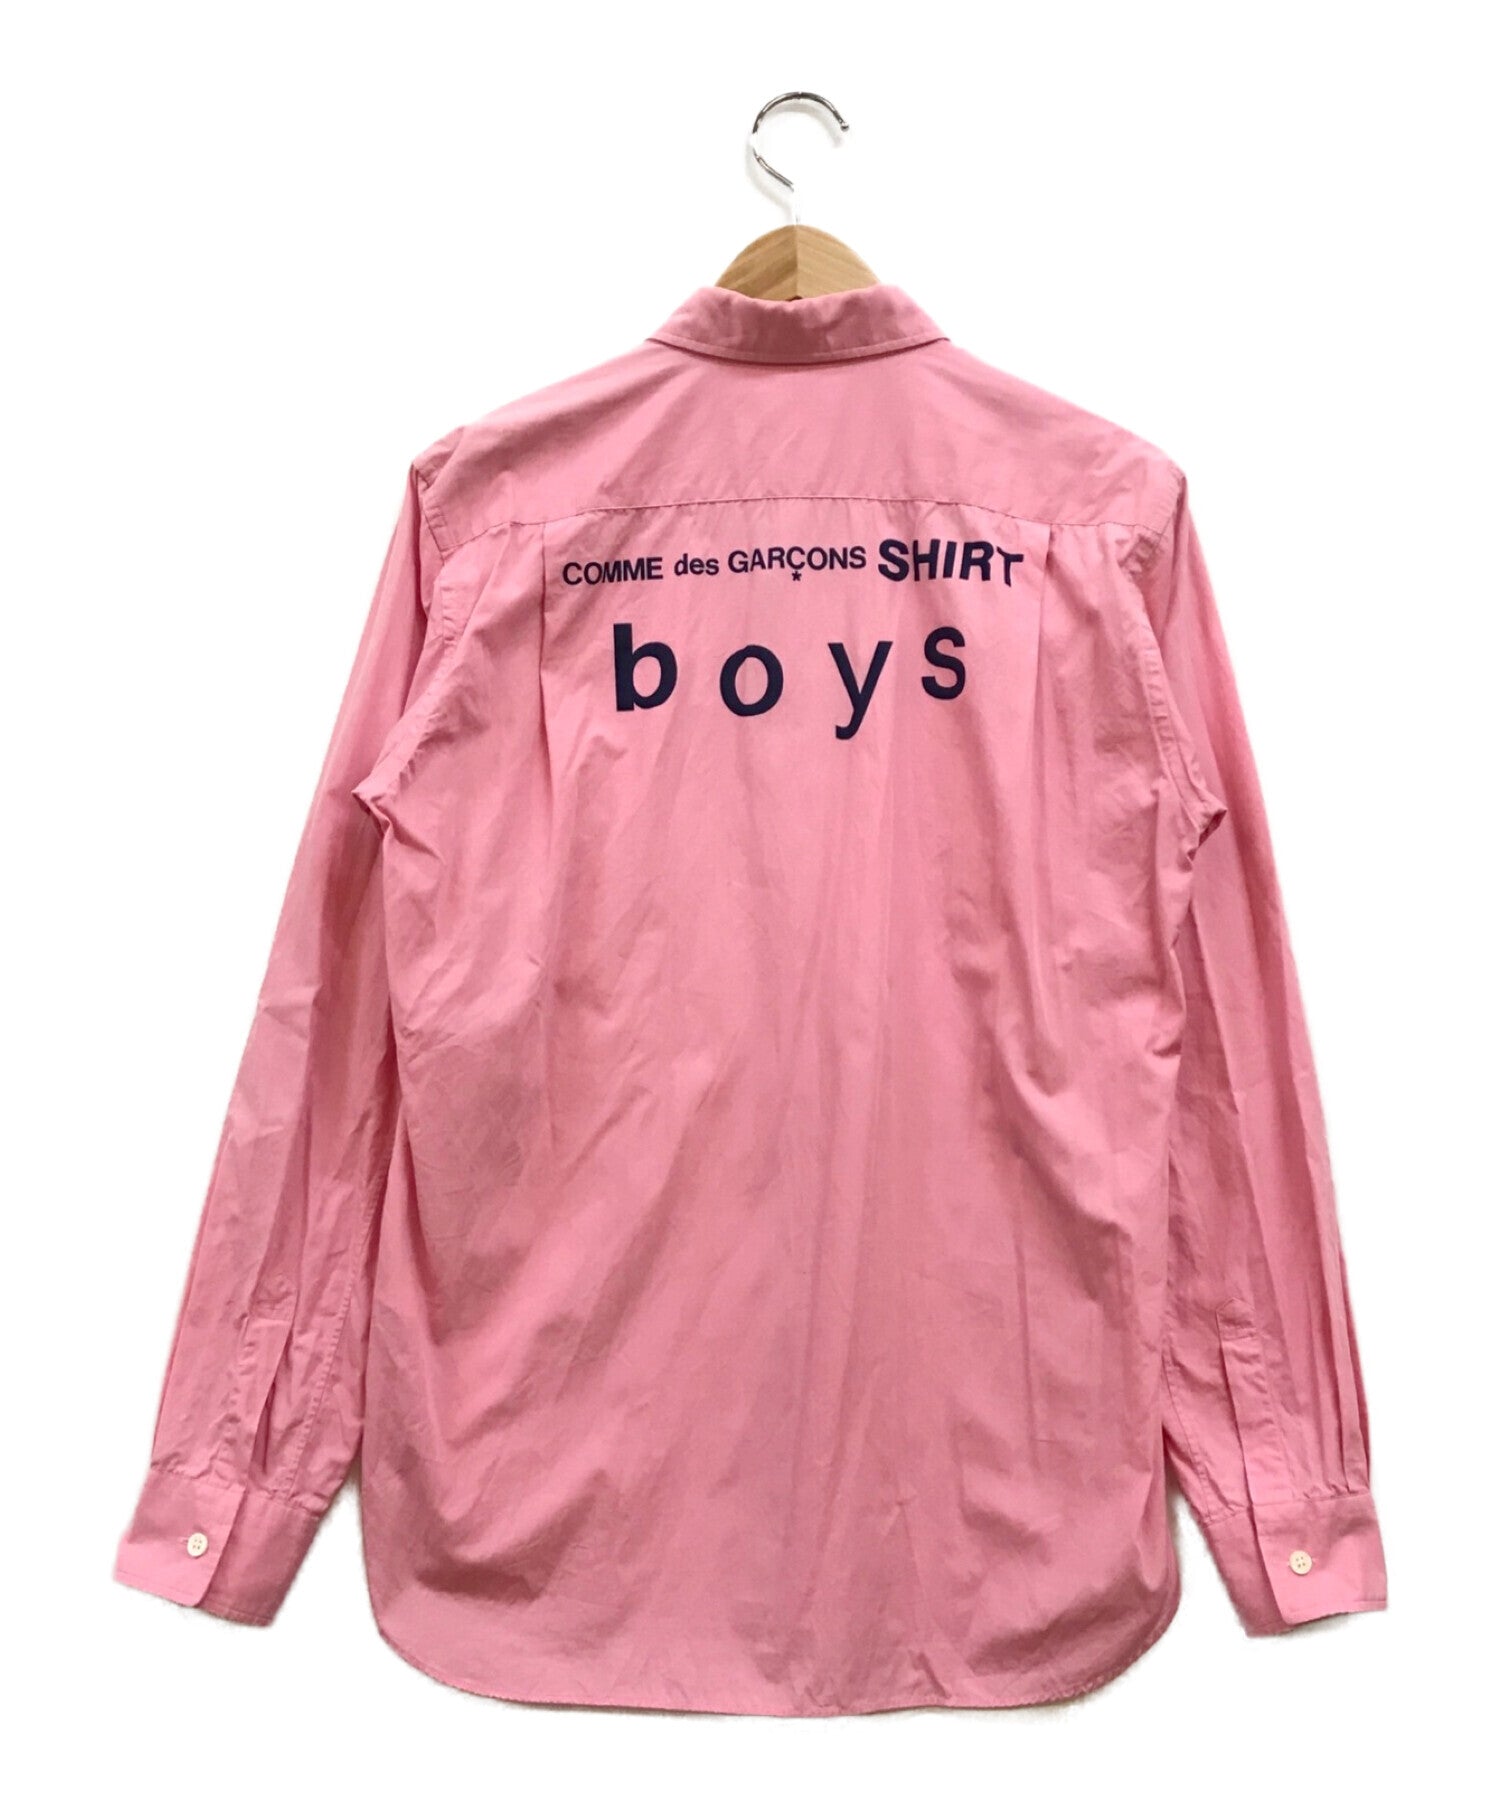 Pre-owned] COMME des GARCONS SHIRT BOY back printed shirt